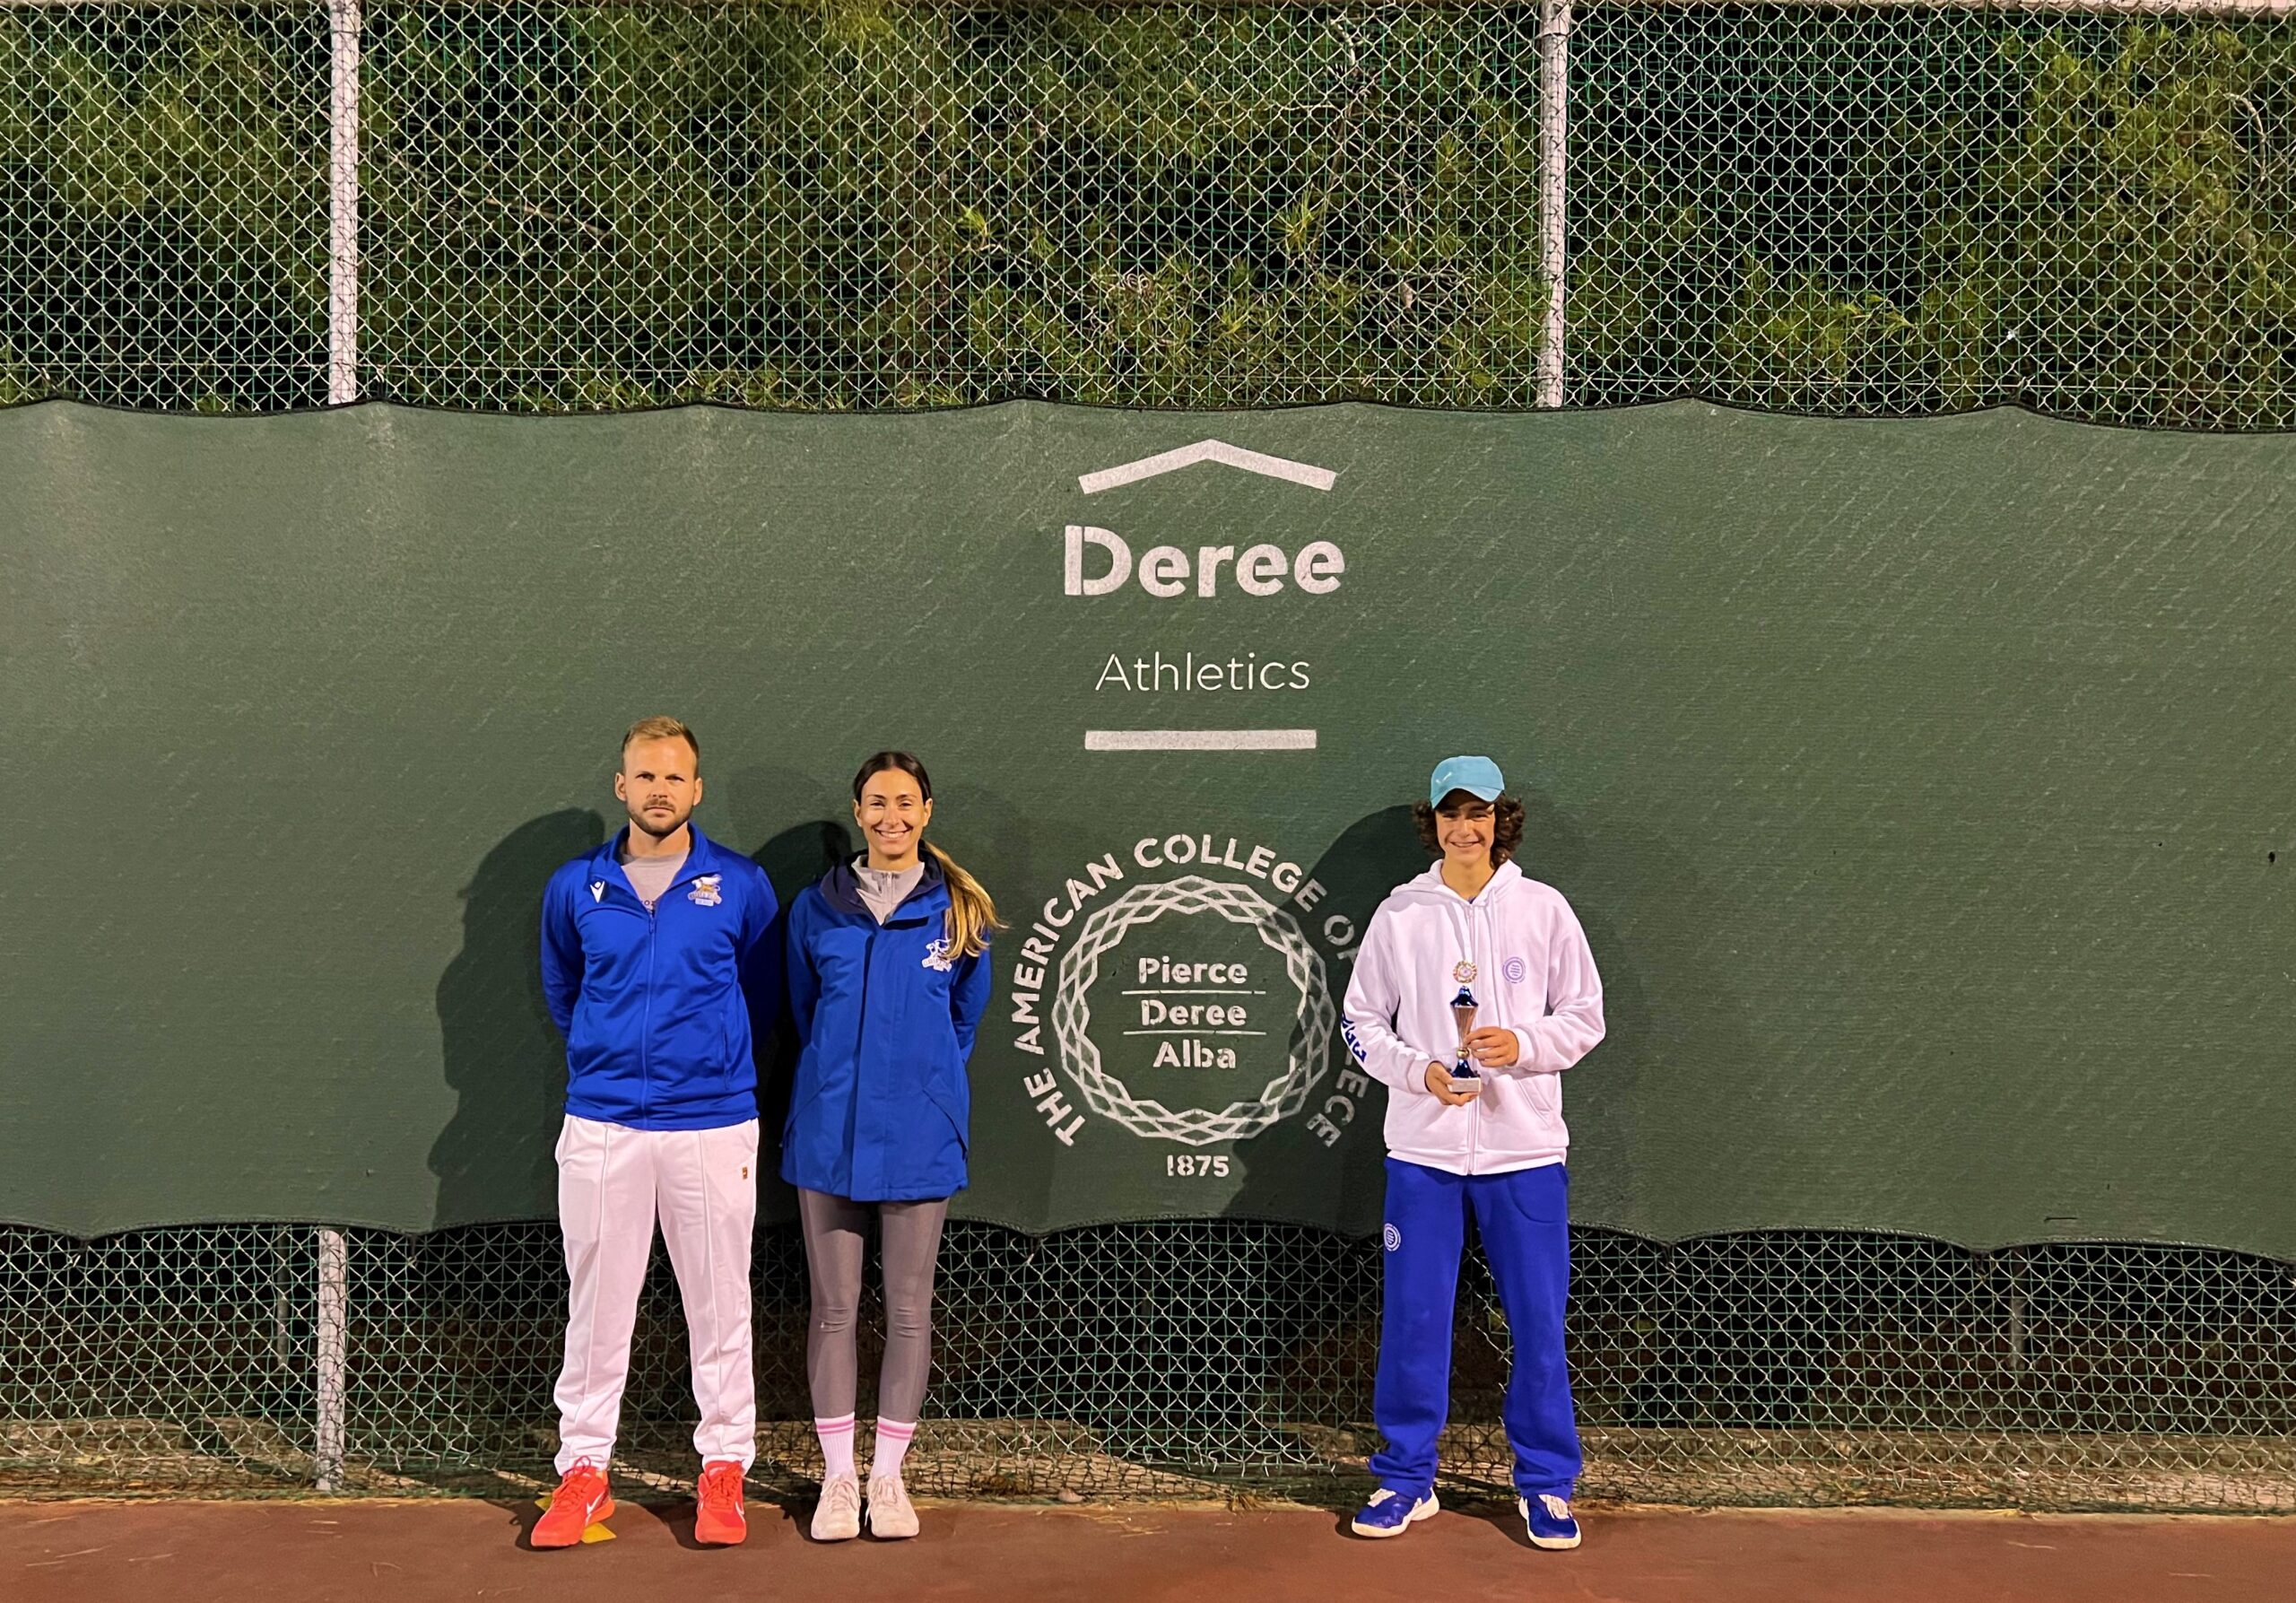 Results of Deree Tennis Academy from the E3 tournament in Vari.